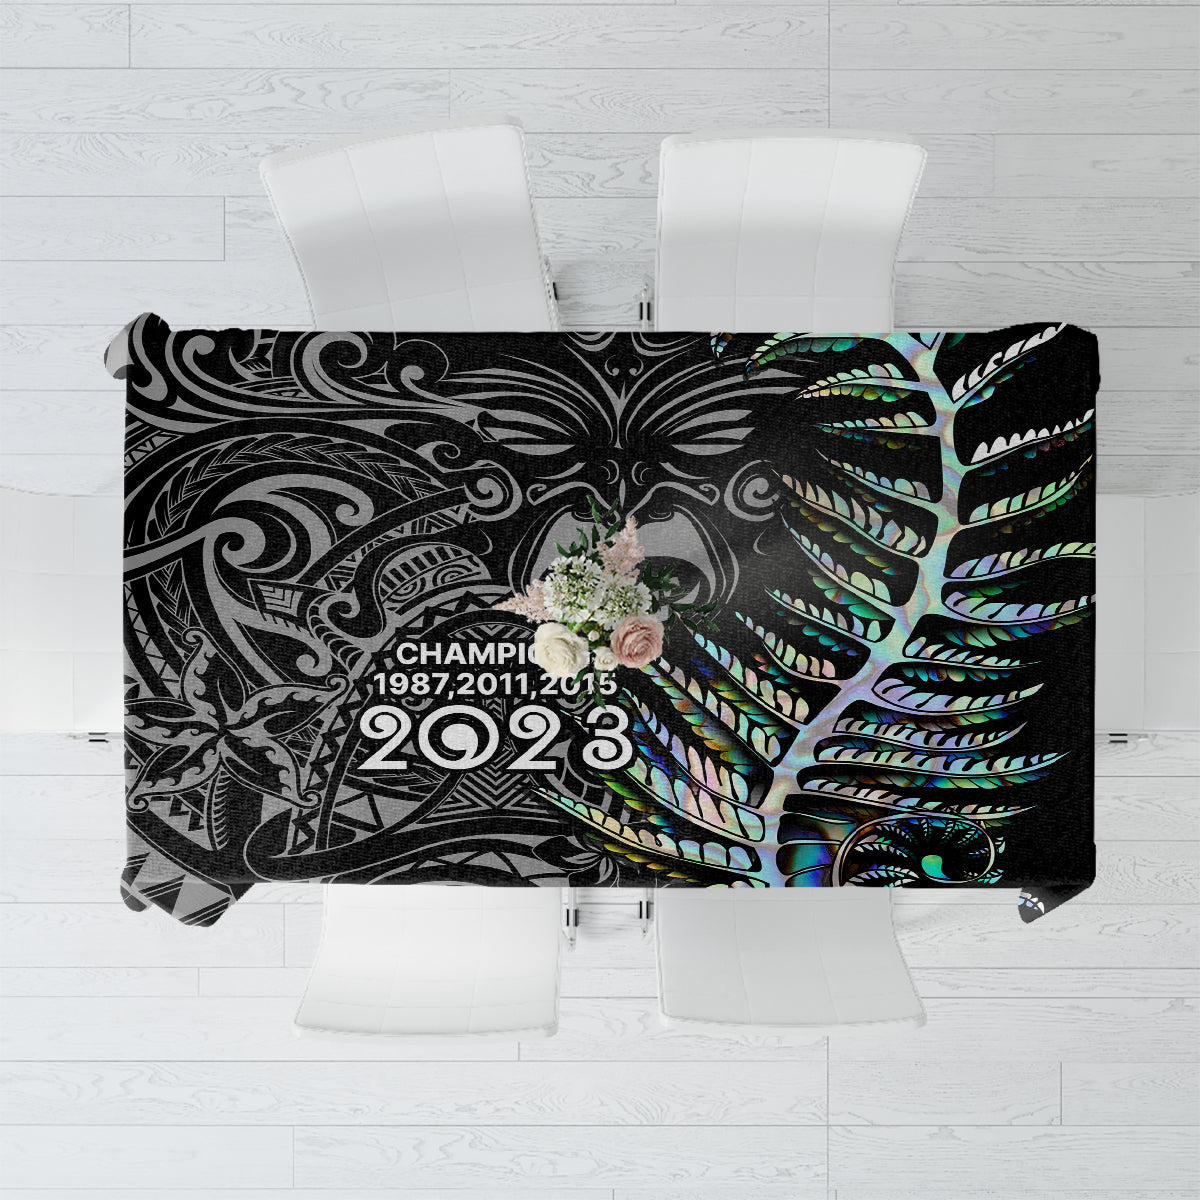 New Zealand Rugby Tablecloth NZ Black Fern Champions History With Papua Shell LT9 Black - Polynesian Pride